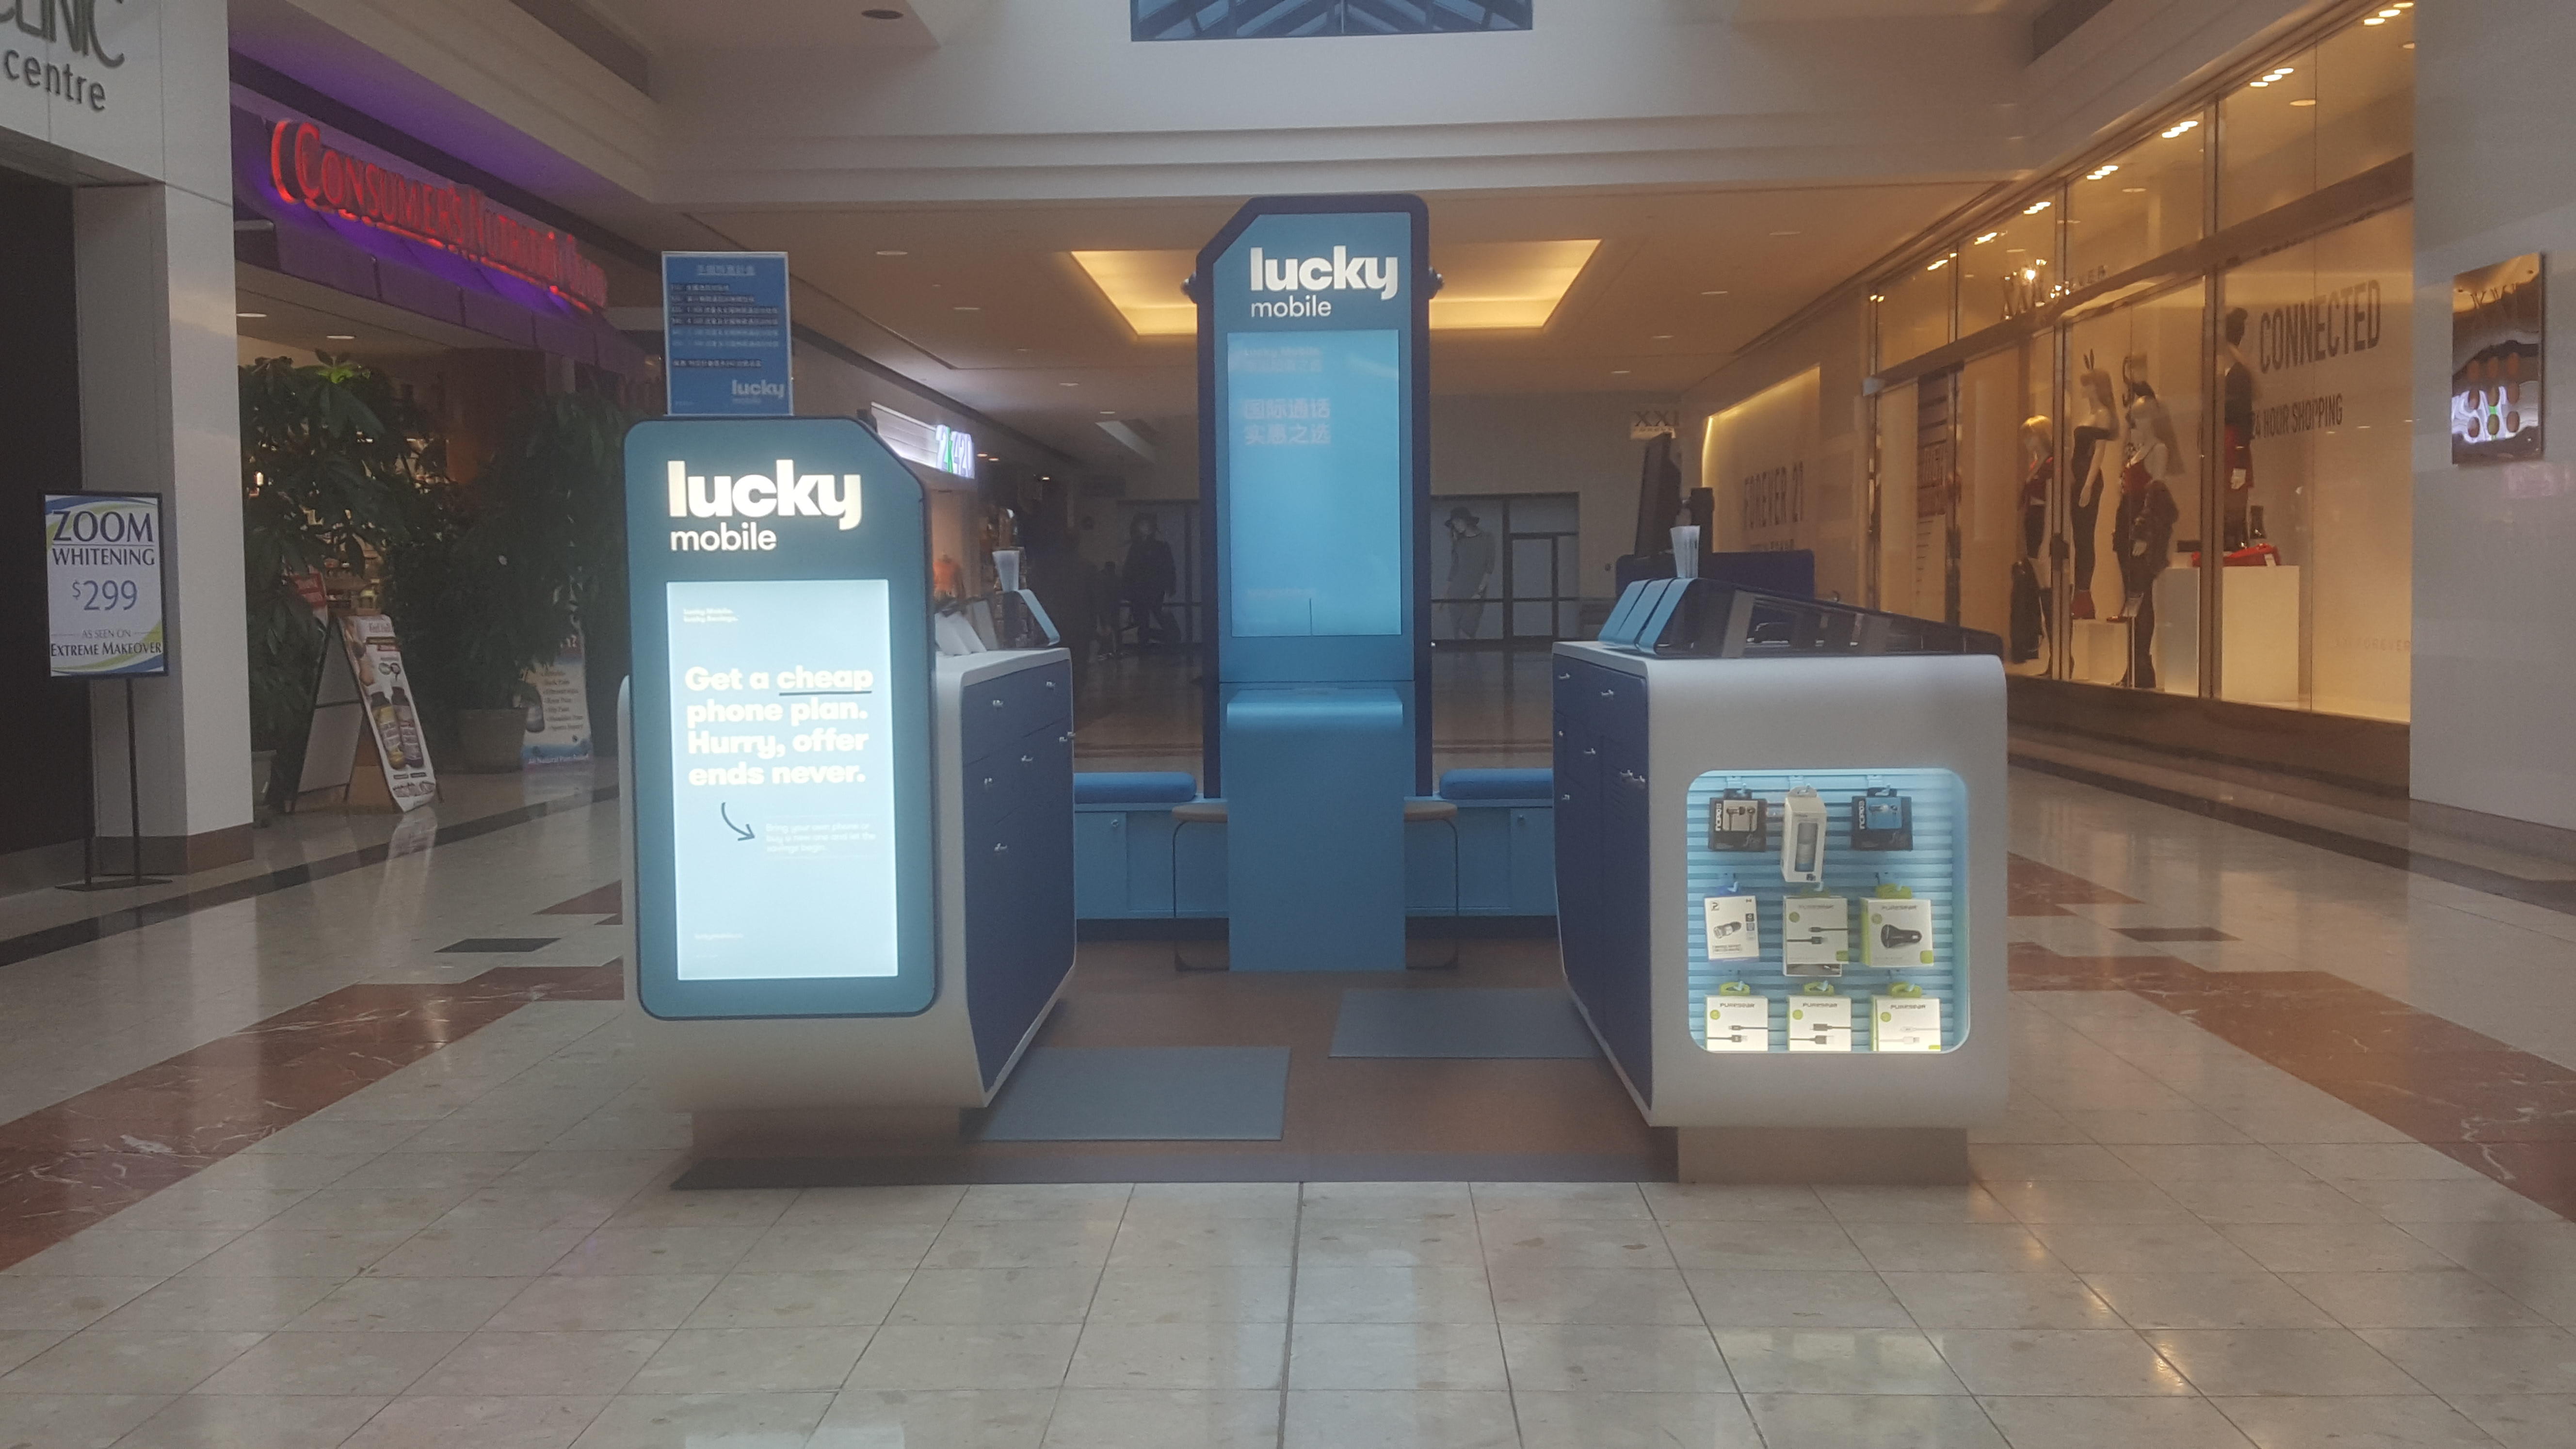 Lucky Mobile-Closed Richmond (604)288-4931